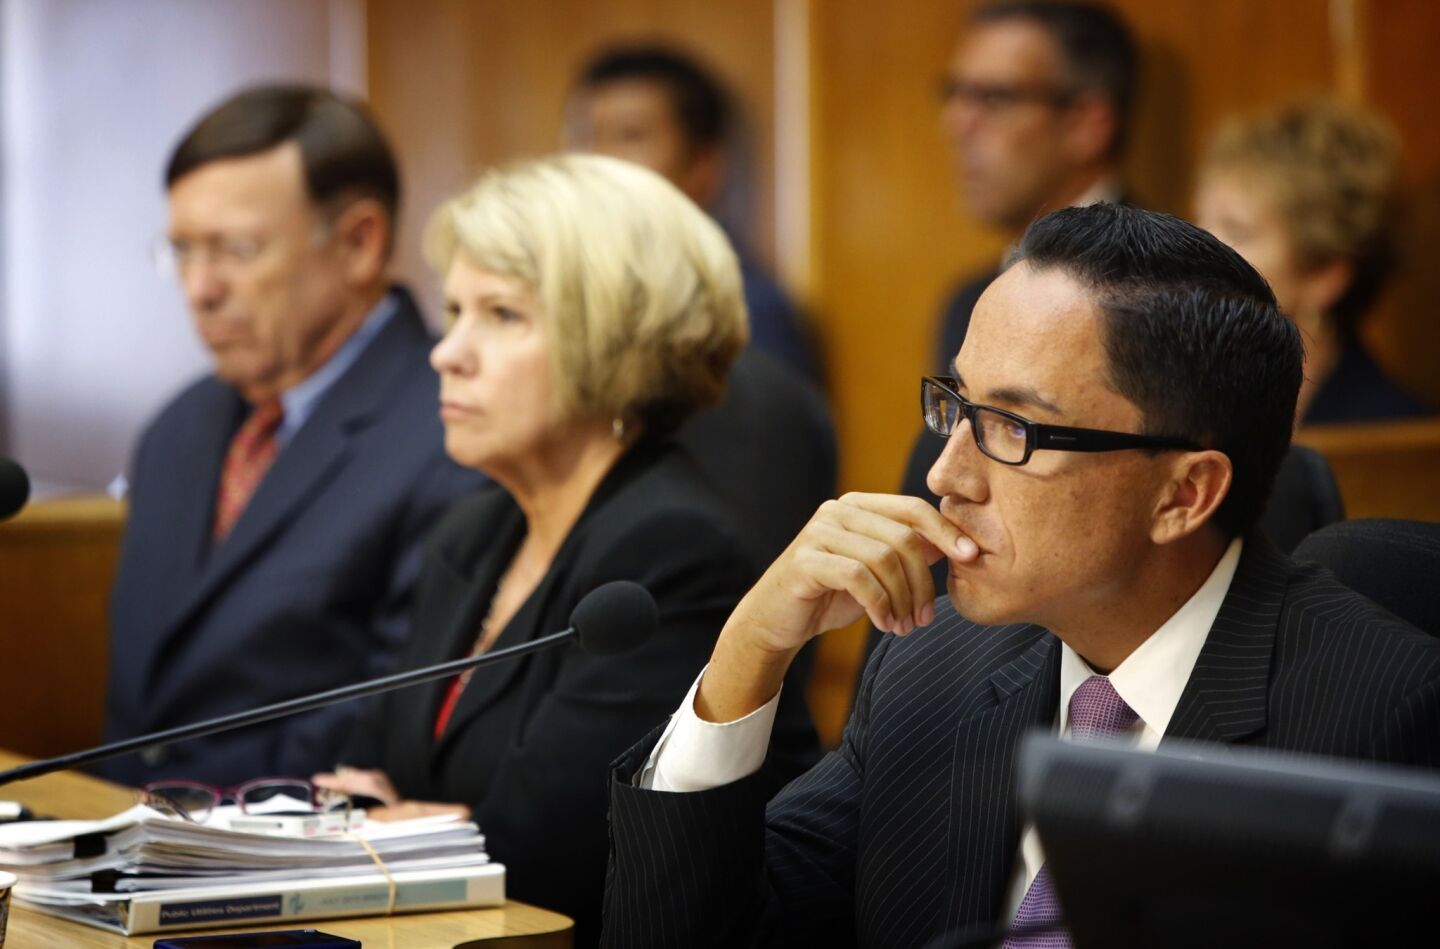 San Diego City Council President Todd Gloria, right, listens to public comment about Mayor Bob Filner during a special meeting in the council chambers. Later in the afternoon, Filner appeared and announced his resignation, with Gloria appointed interim mayor.